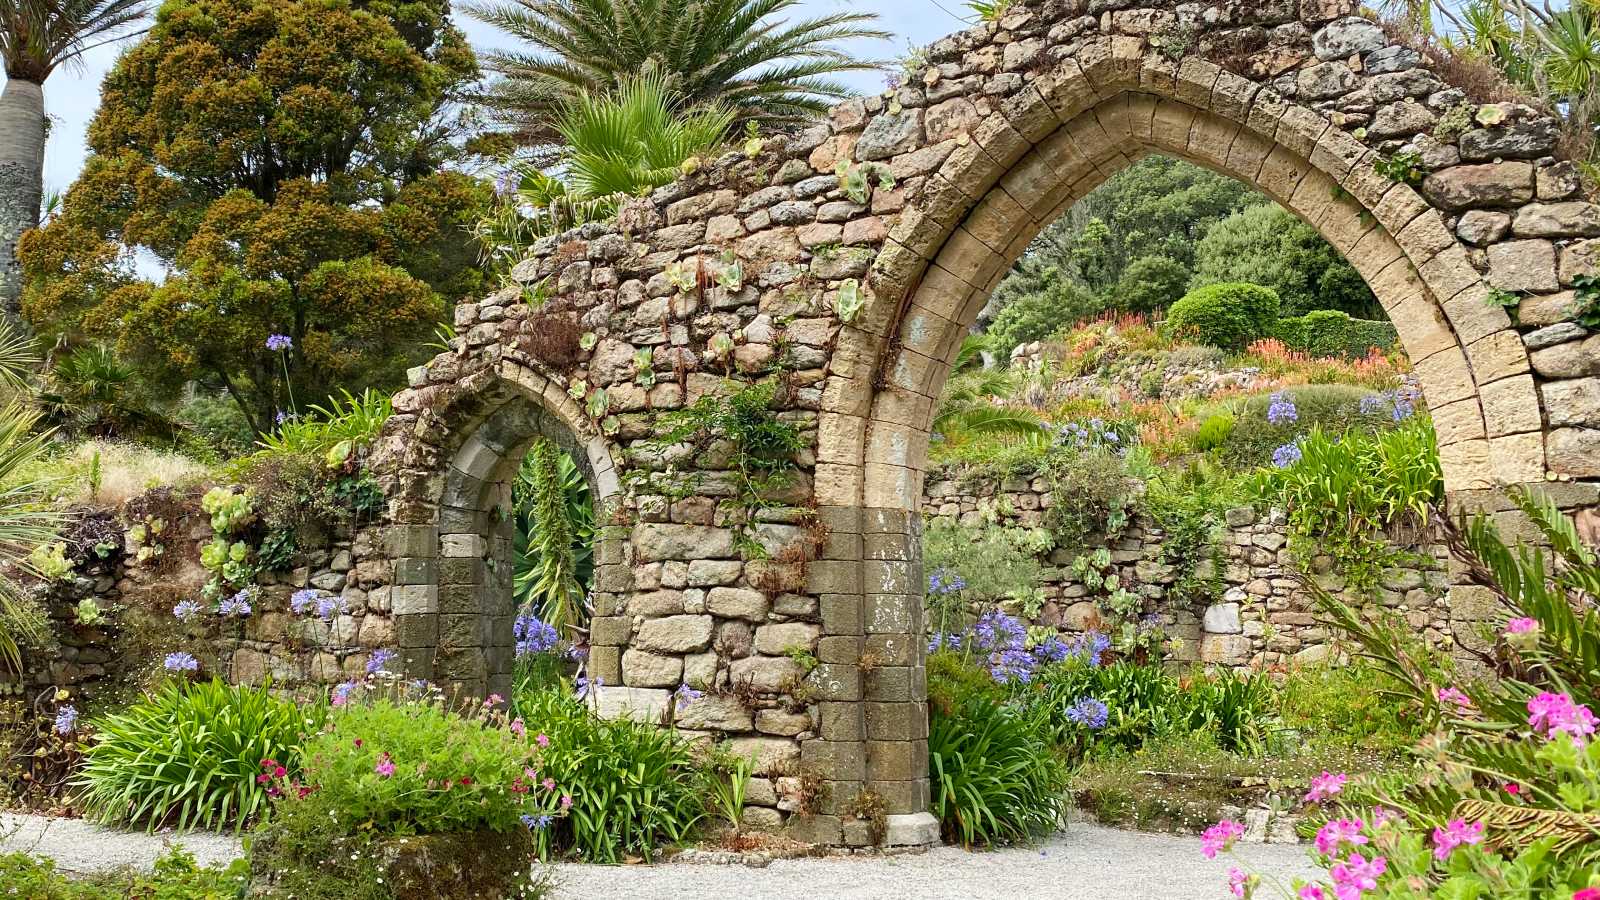 The ruins of St. Nicholas Priory in Tresco's Abbey Gardens